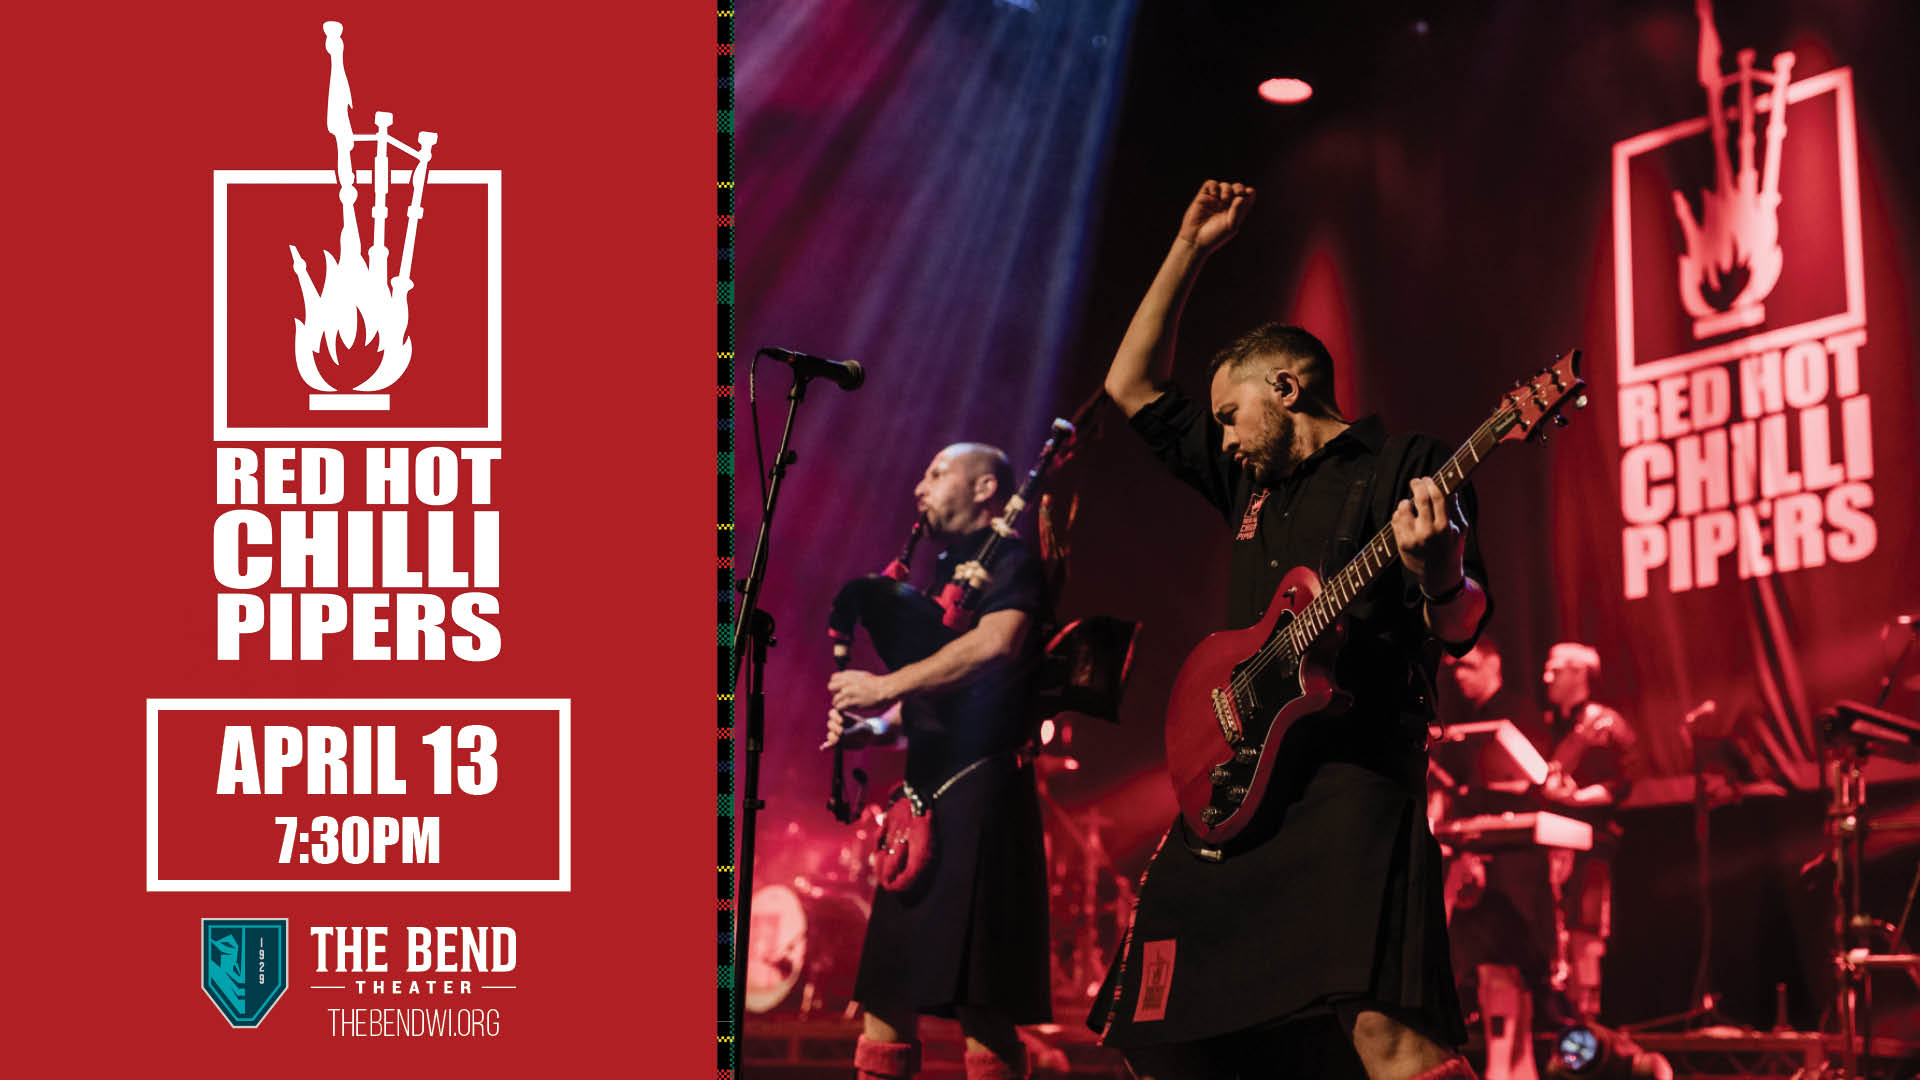 Red Hot Chilli Pipers Live at The Bend Theater